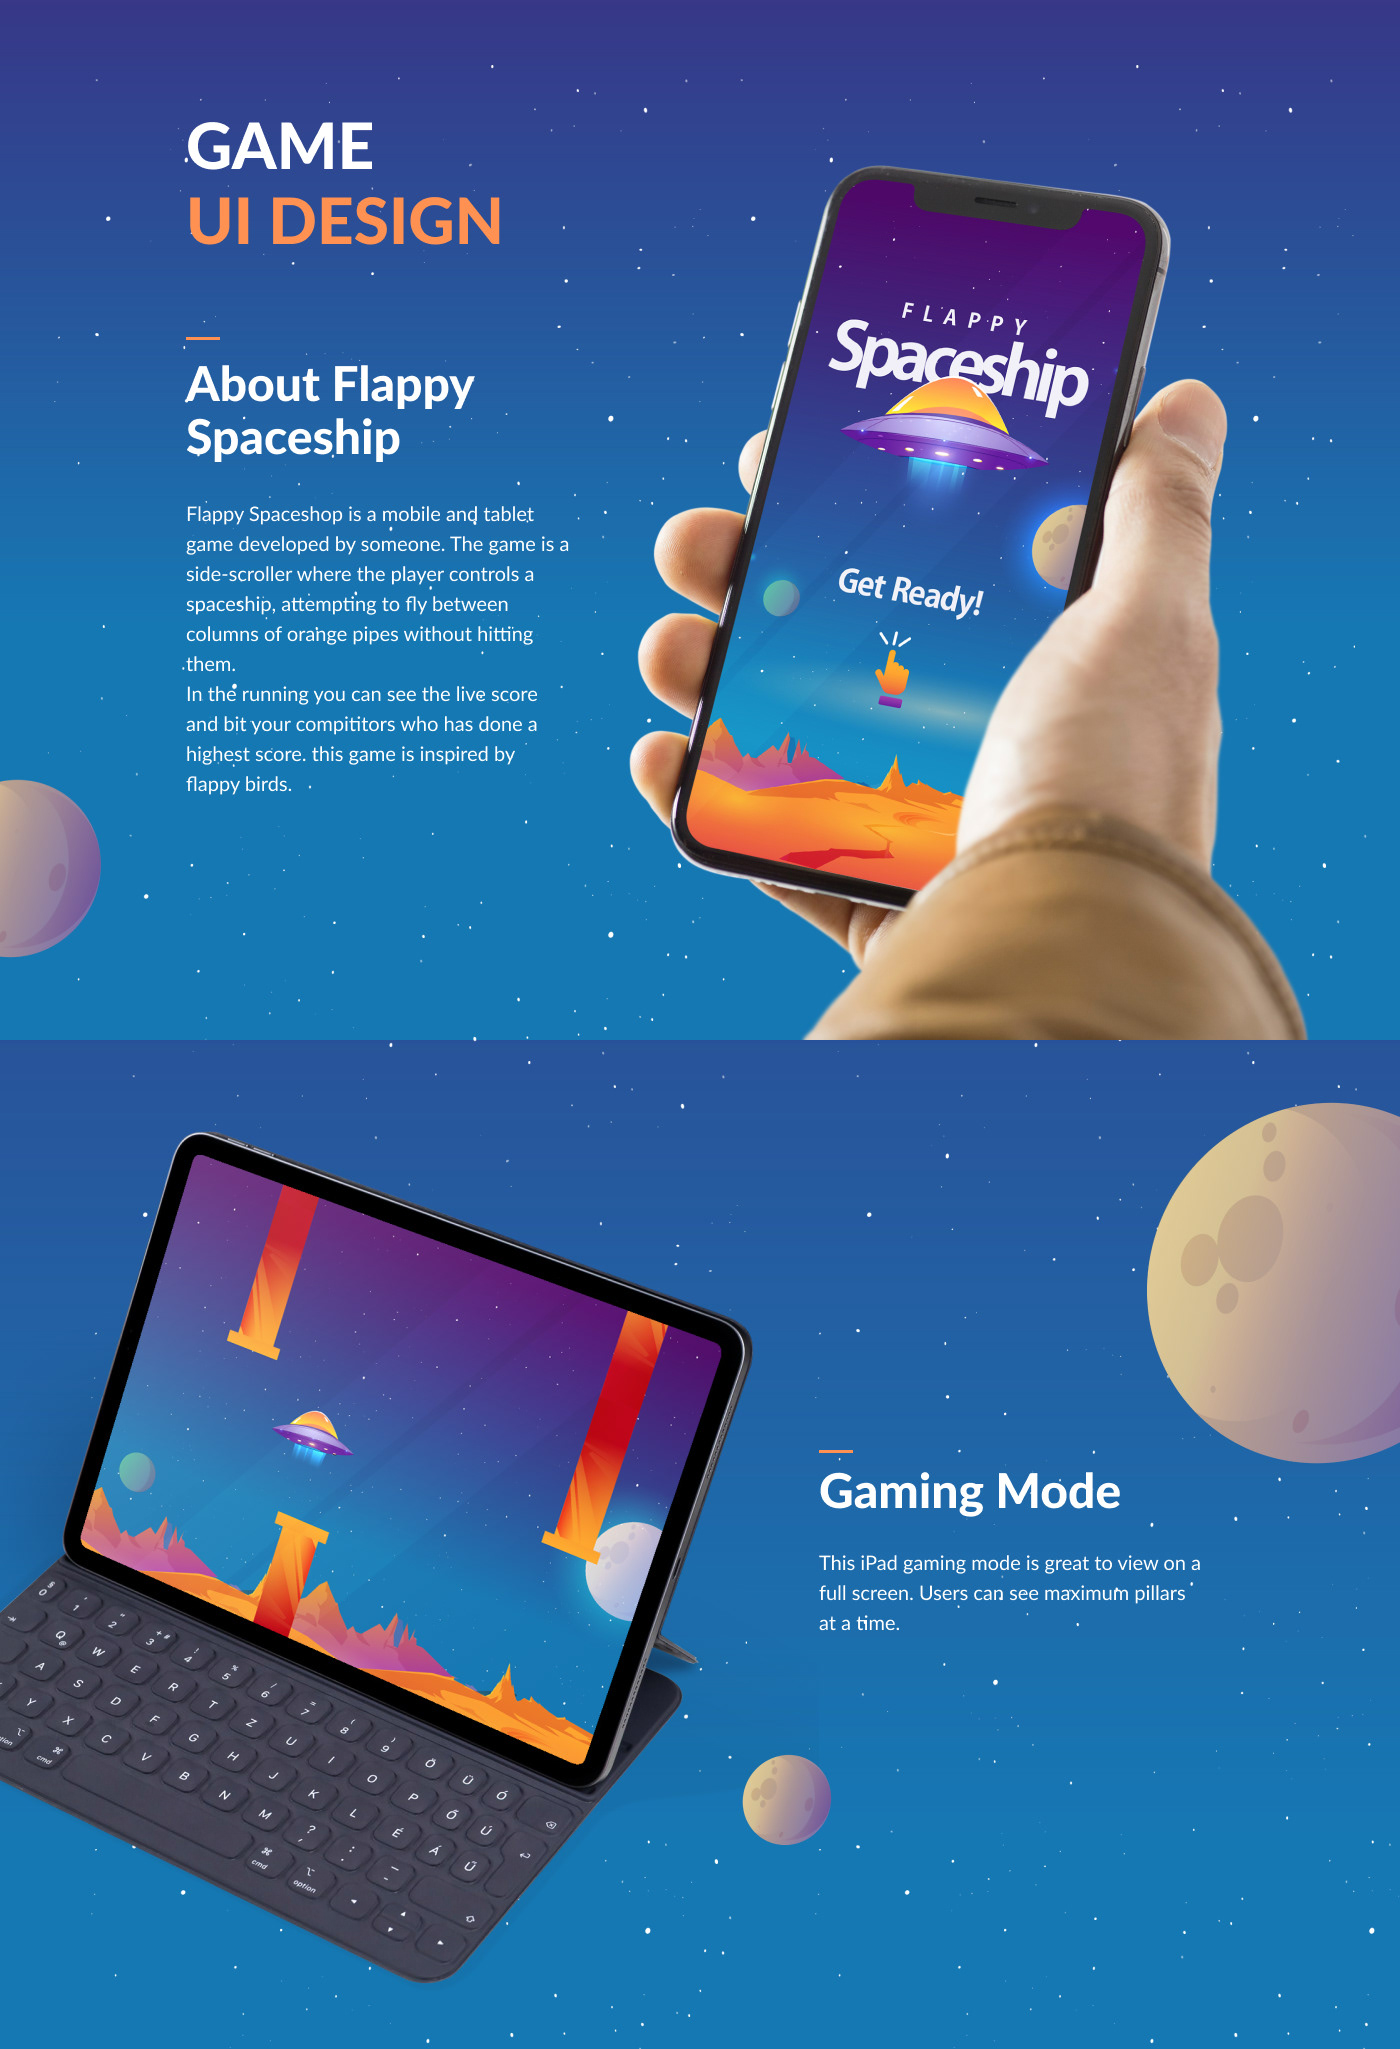 Flappy Spaceship game design by me.